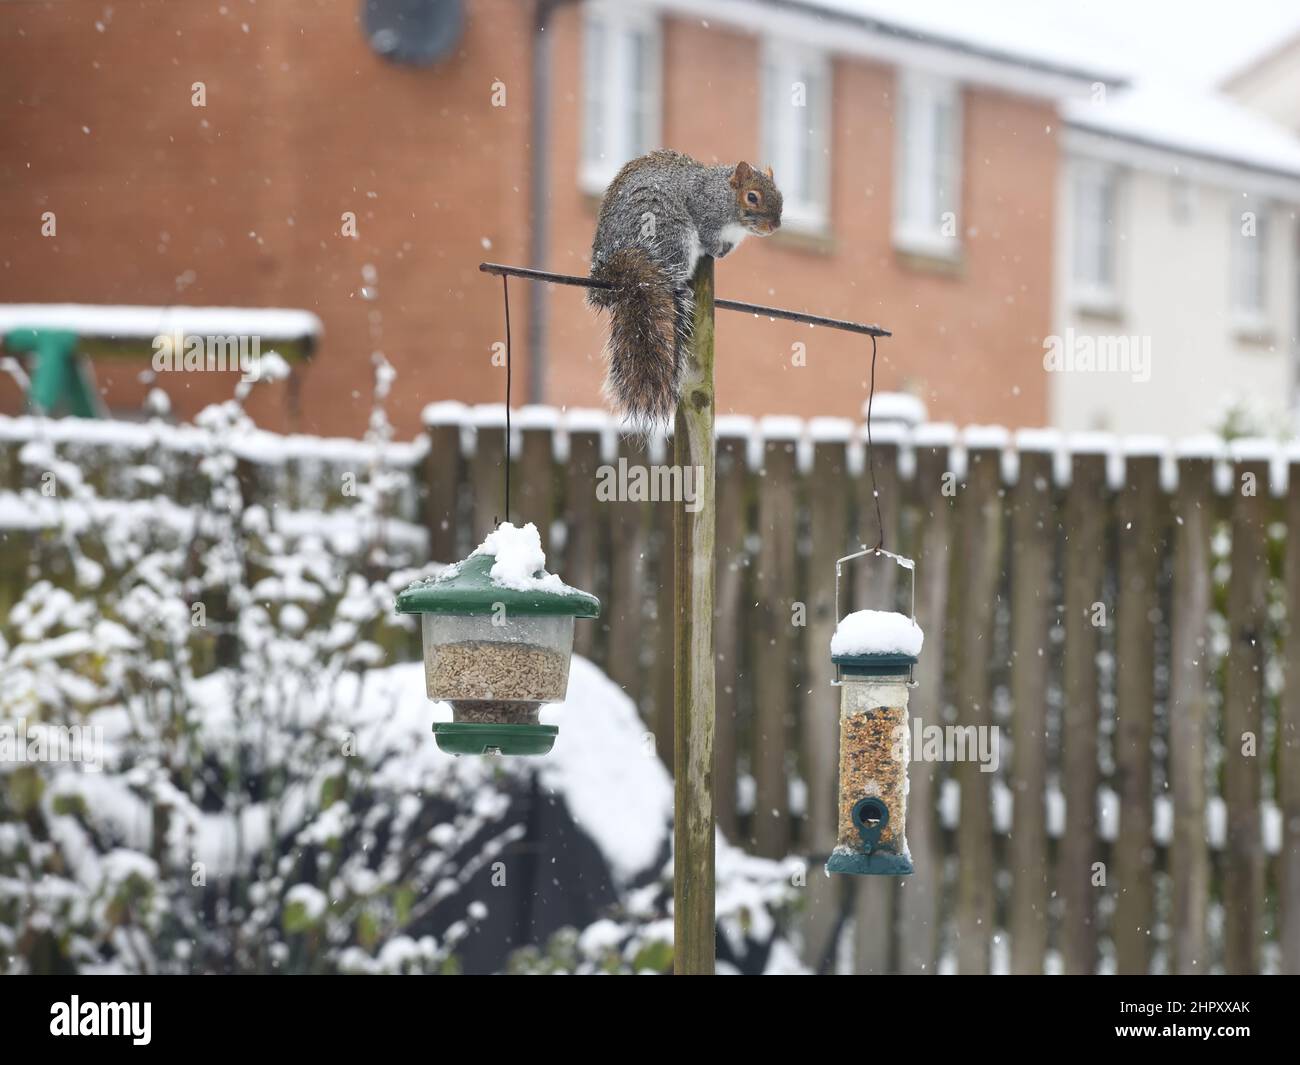 24th, February, 2022. Glasgow, Scotland, UK. UK Weather. A grey Squirrel visits the bird feeders as heavy overnight snow covers the ground in Glasgow. Credit. Douglas Carr/Alamy Live News Stock Photo